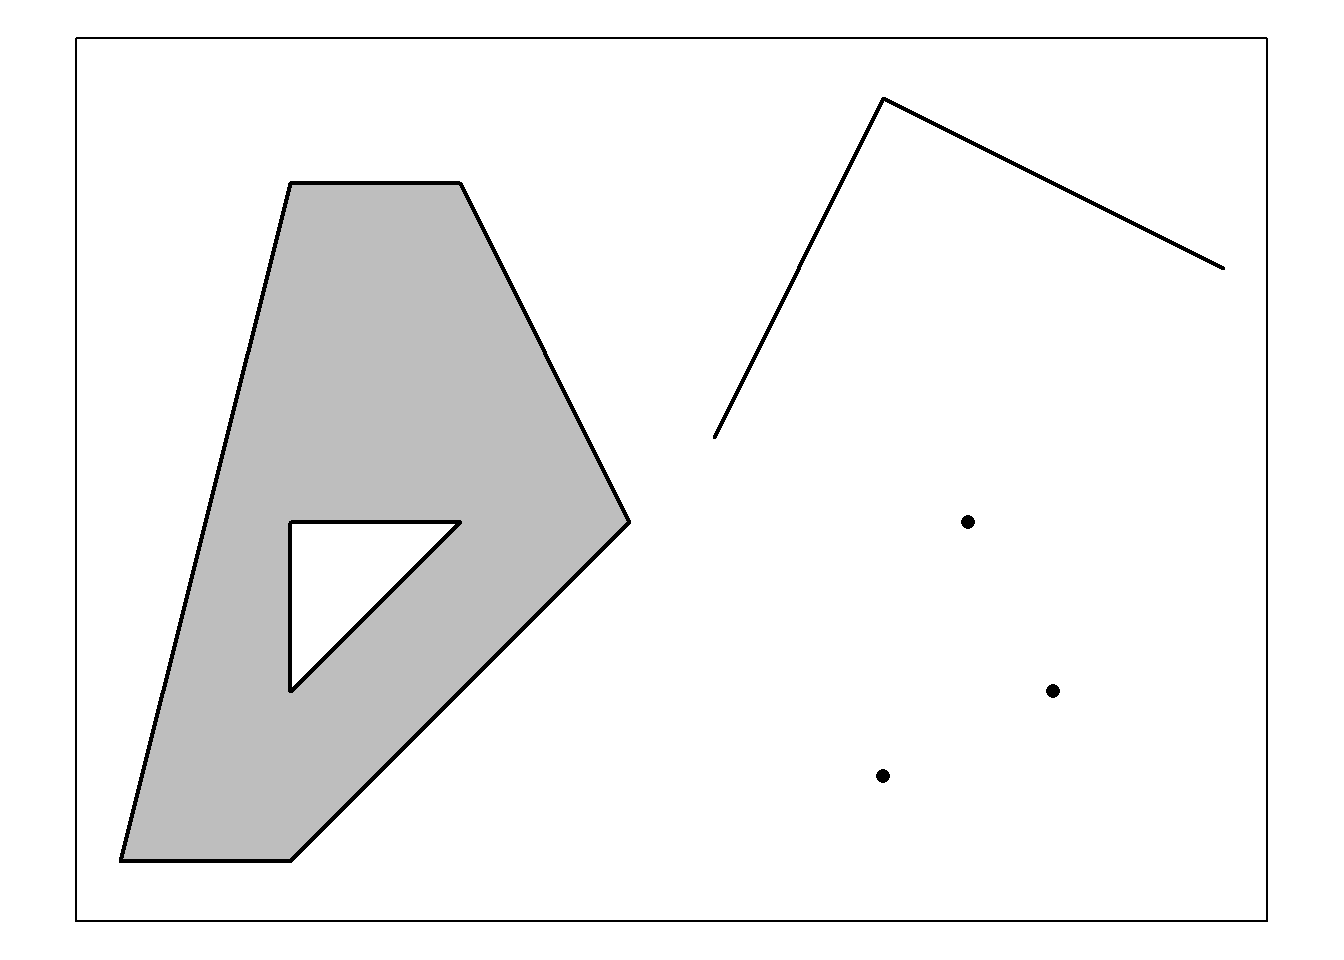 Examples of vector data (polygon, line, and points).